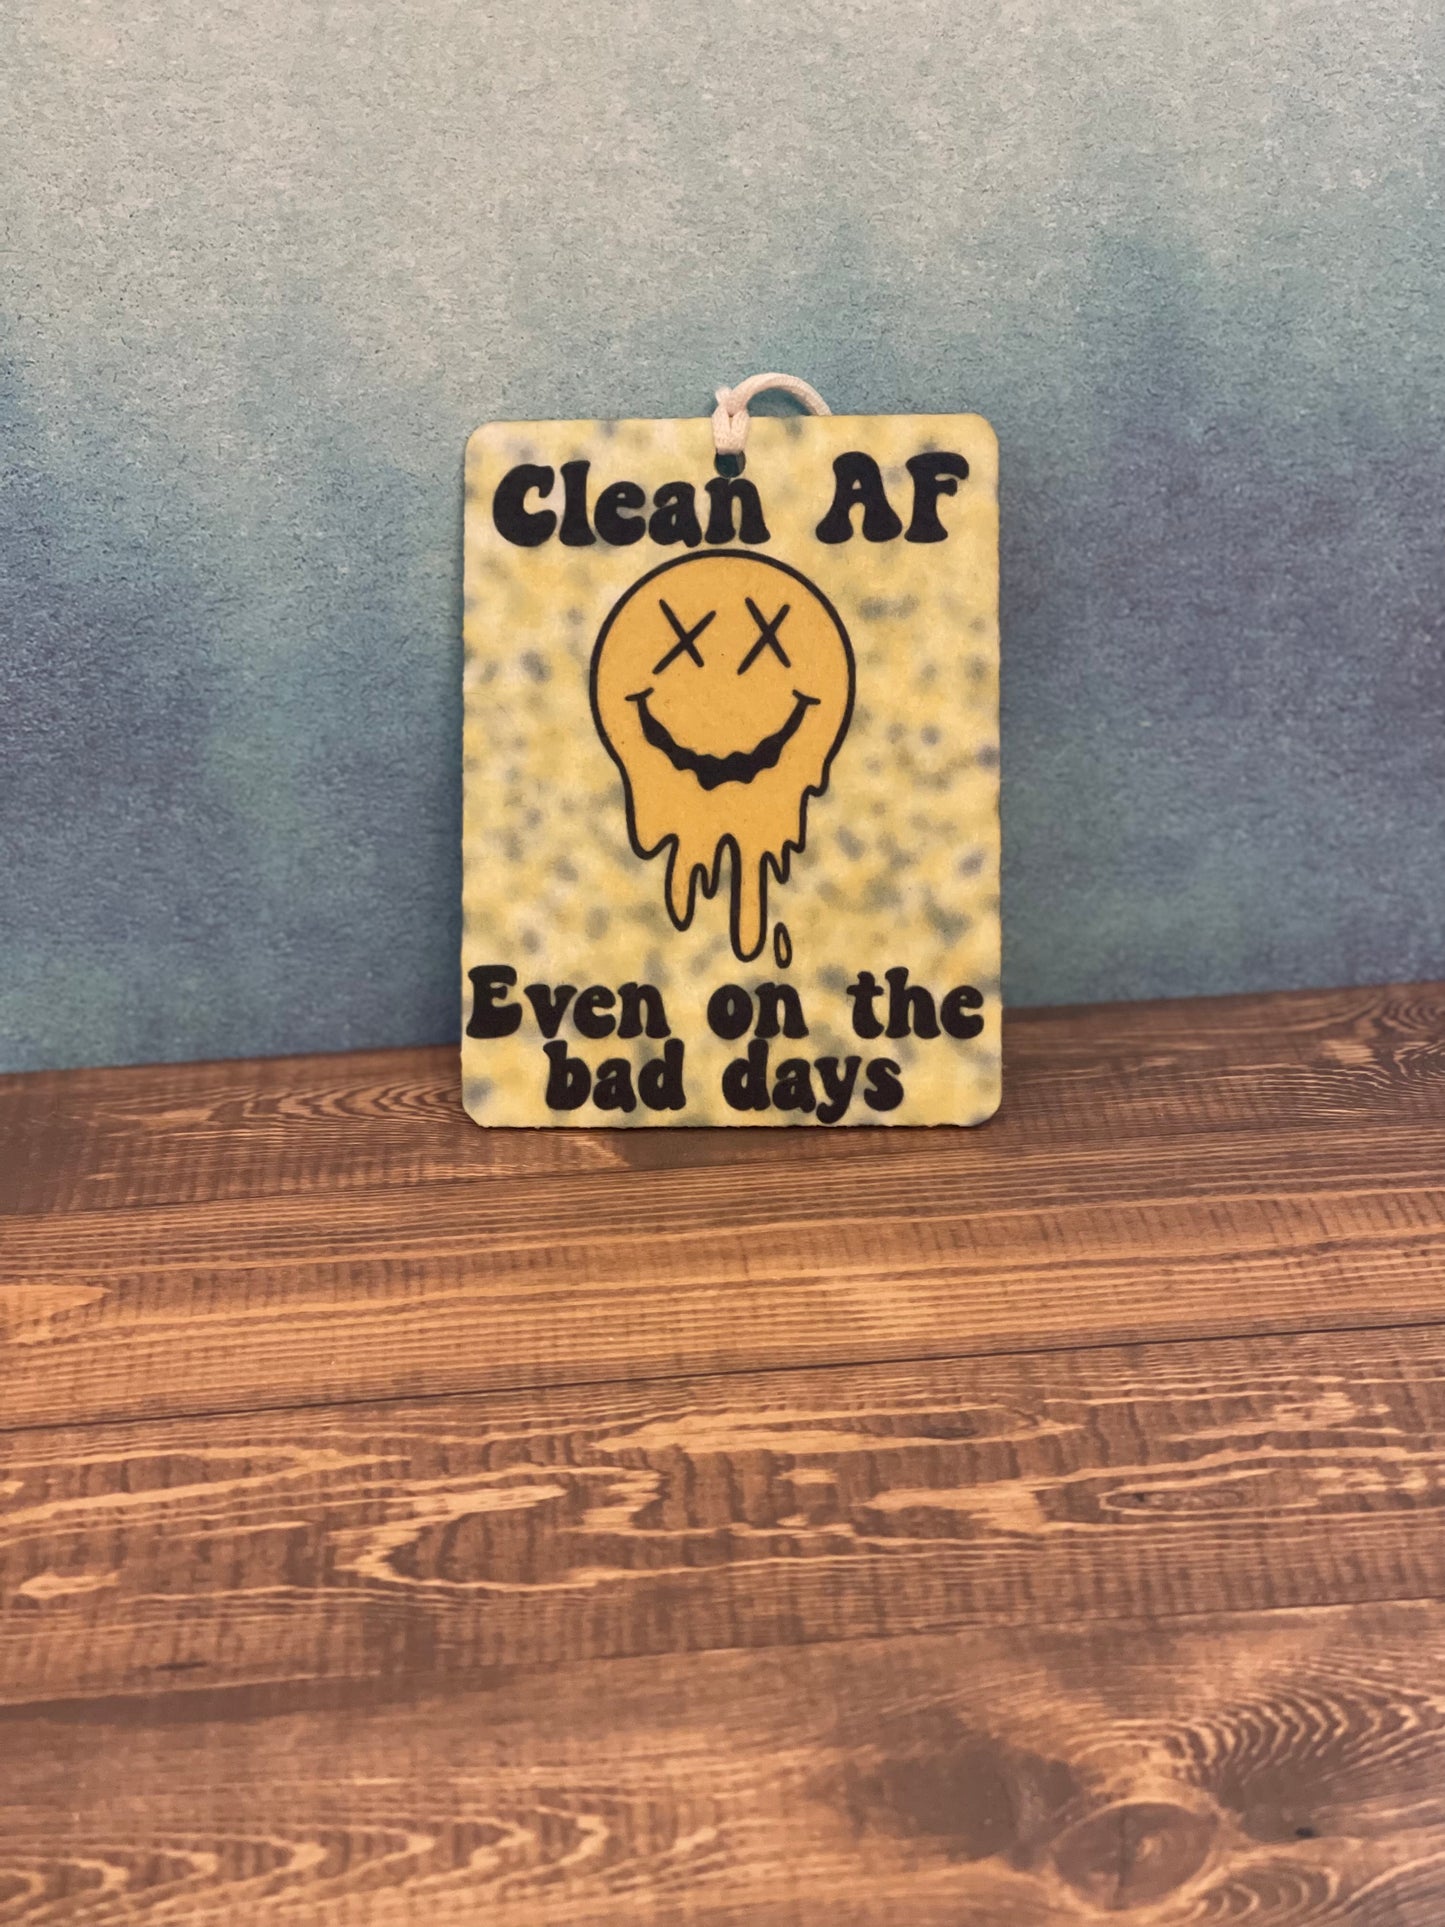 Groovy addiction recovery air freshener, Clean AF even on the bad days